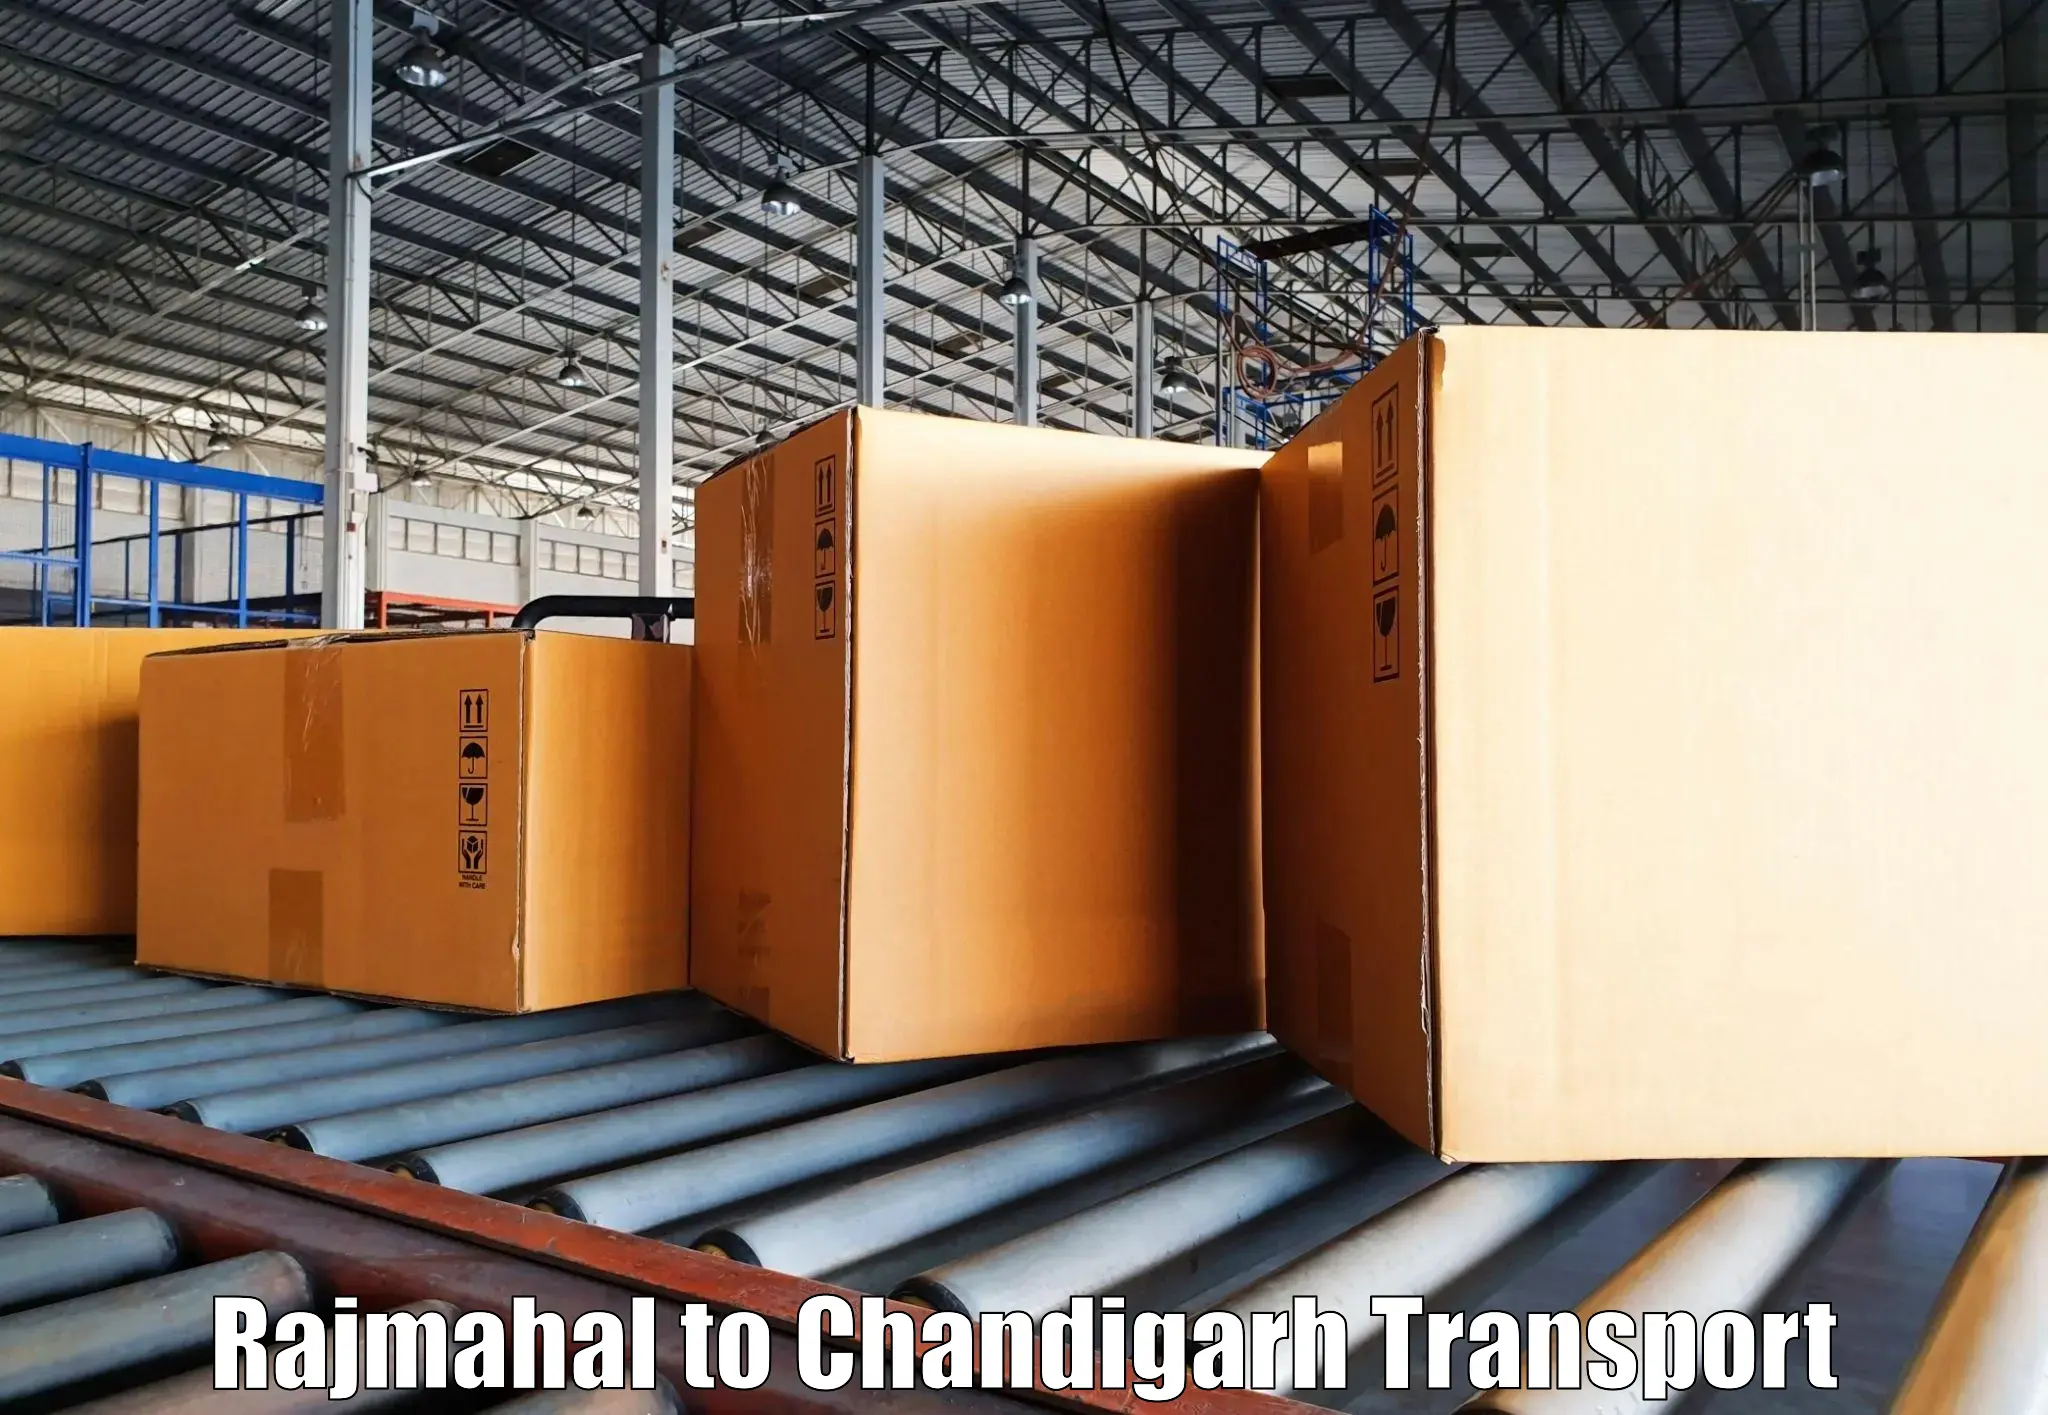 Air freight transport services in Rajmahal to Chandigarh